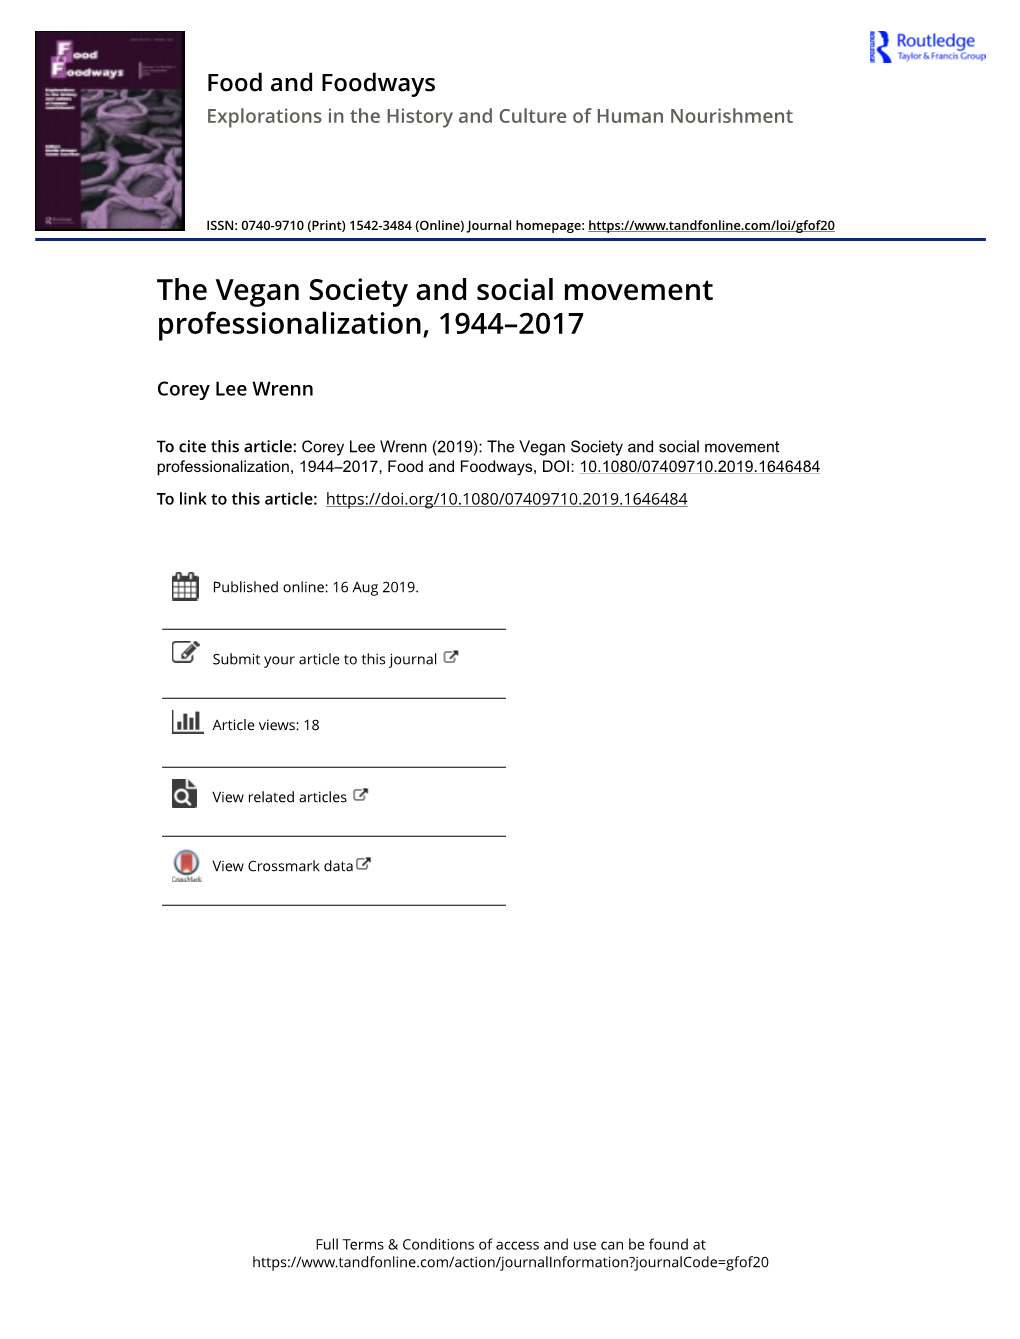 The Vegan Society and Social Movement Professionalization, 1944–2017